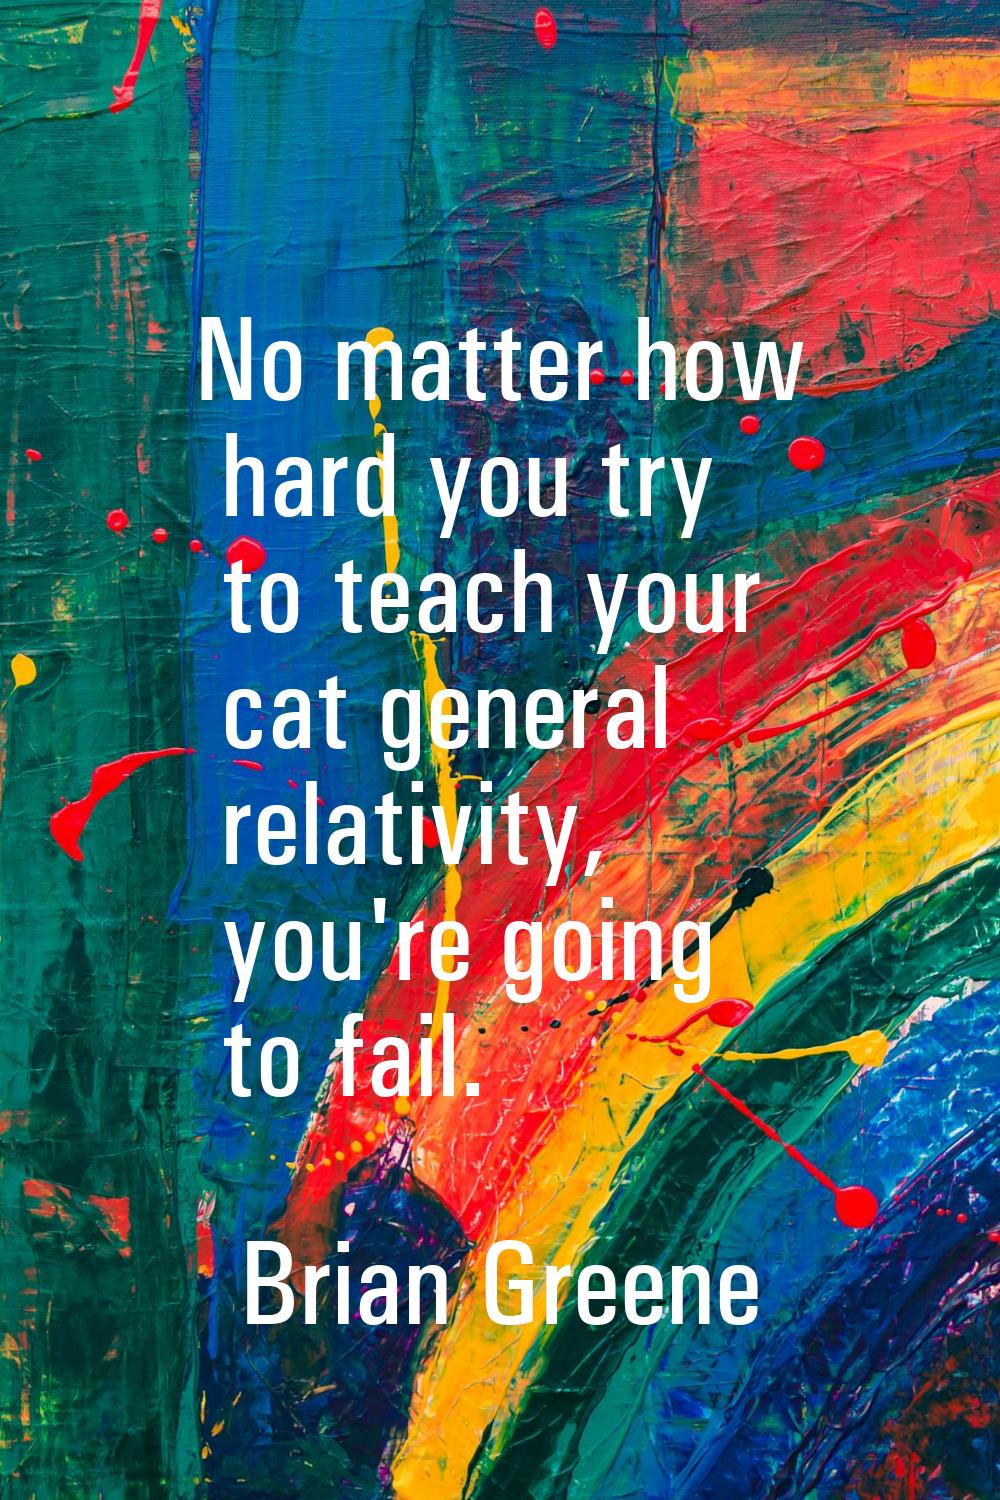 No matter how hard you try to teach your cat general relativity, you're going to fail.